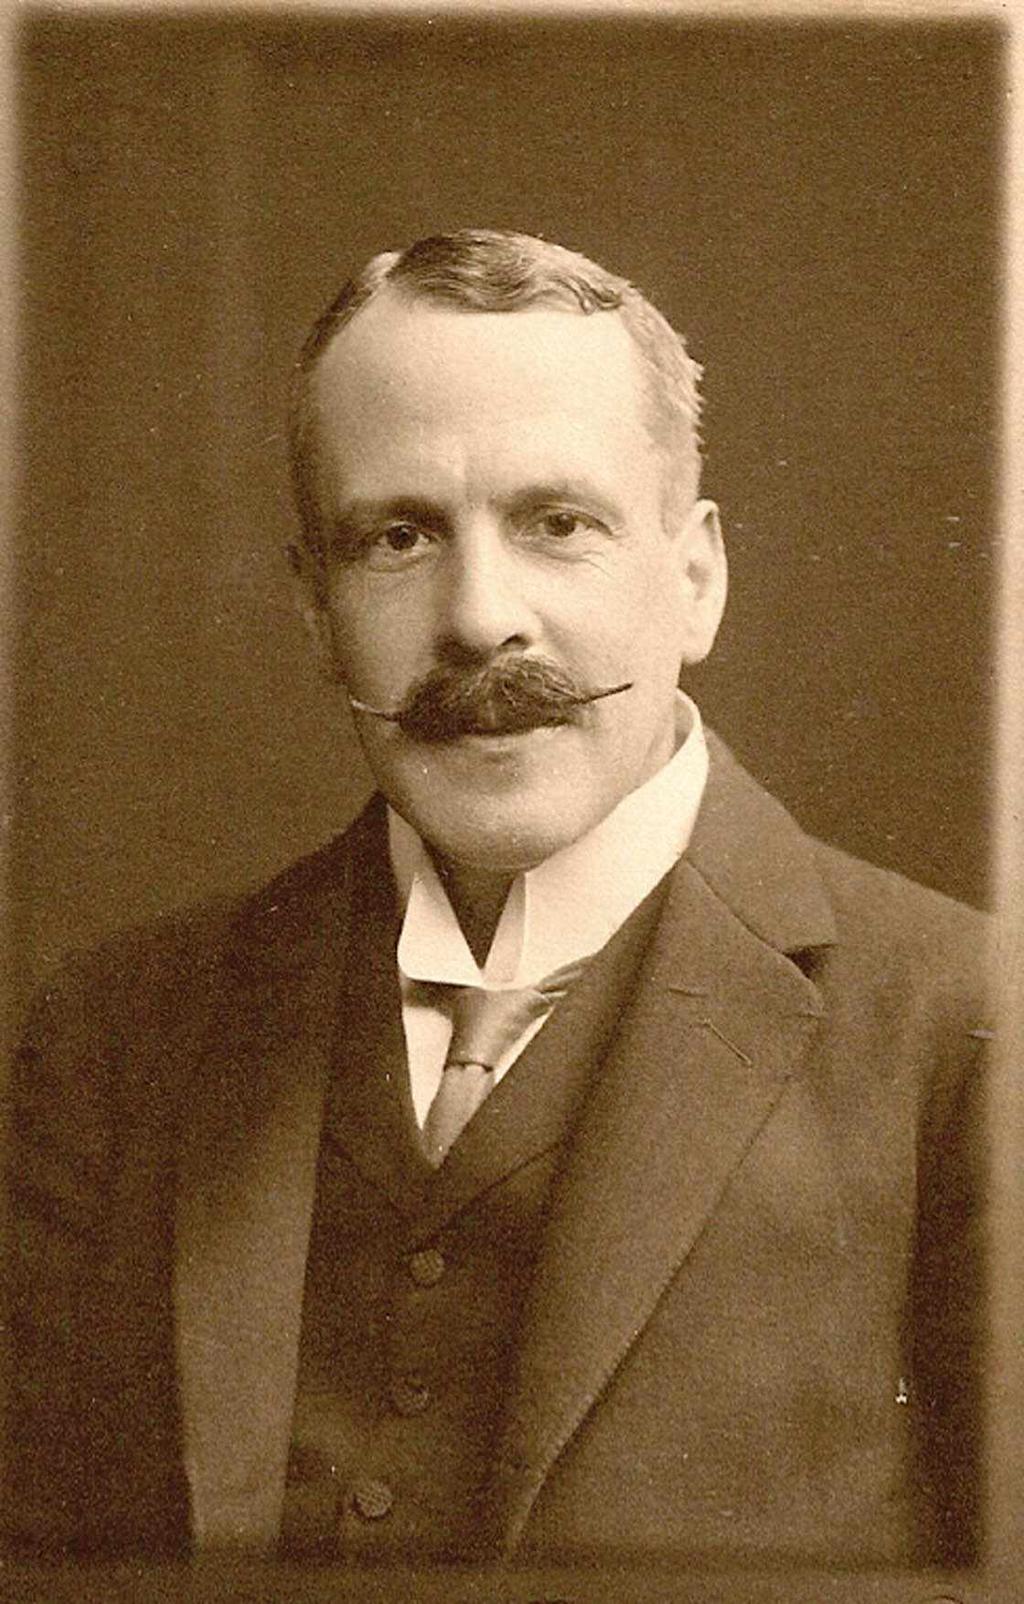 A junior partner in the firm at a later date was Hubert Edward Aldridge (born Southampton in 1860) related to the Mooring Aldridge family in Christchurch.